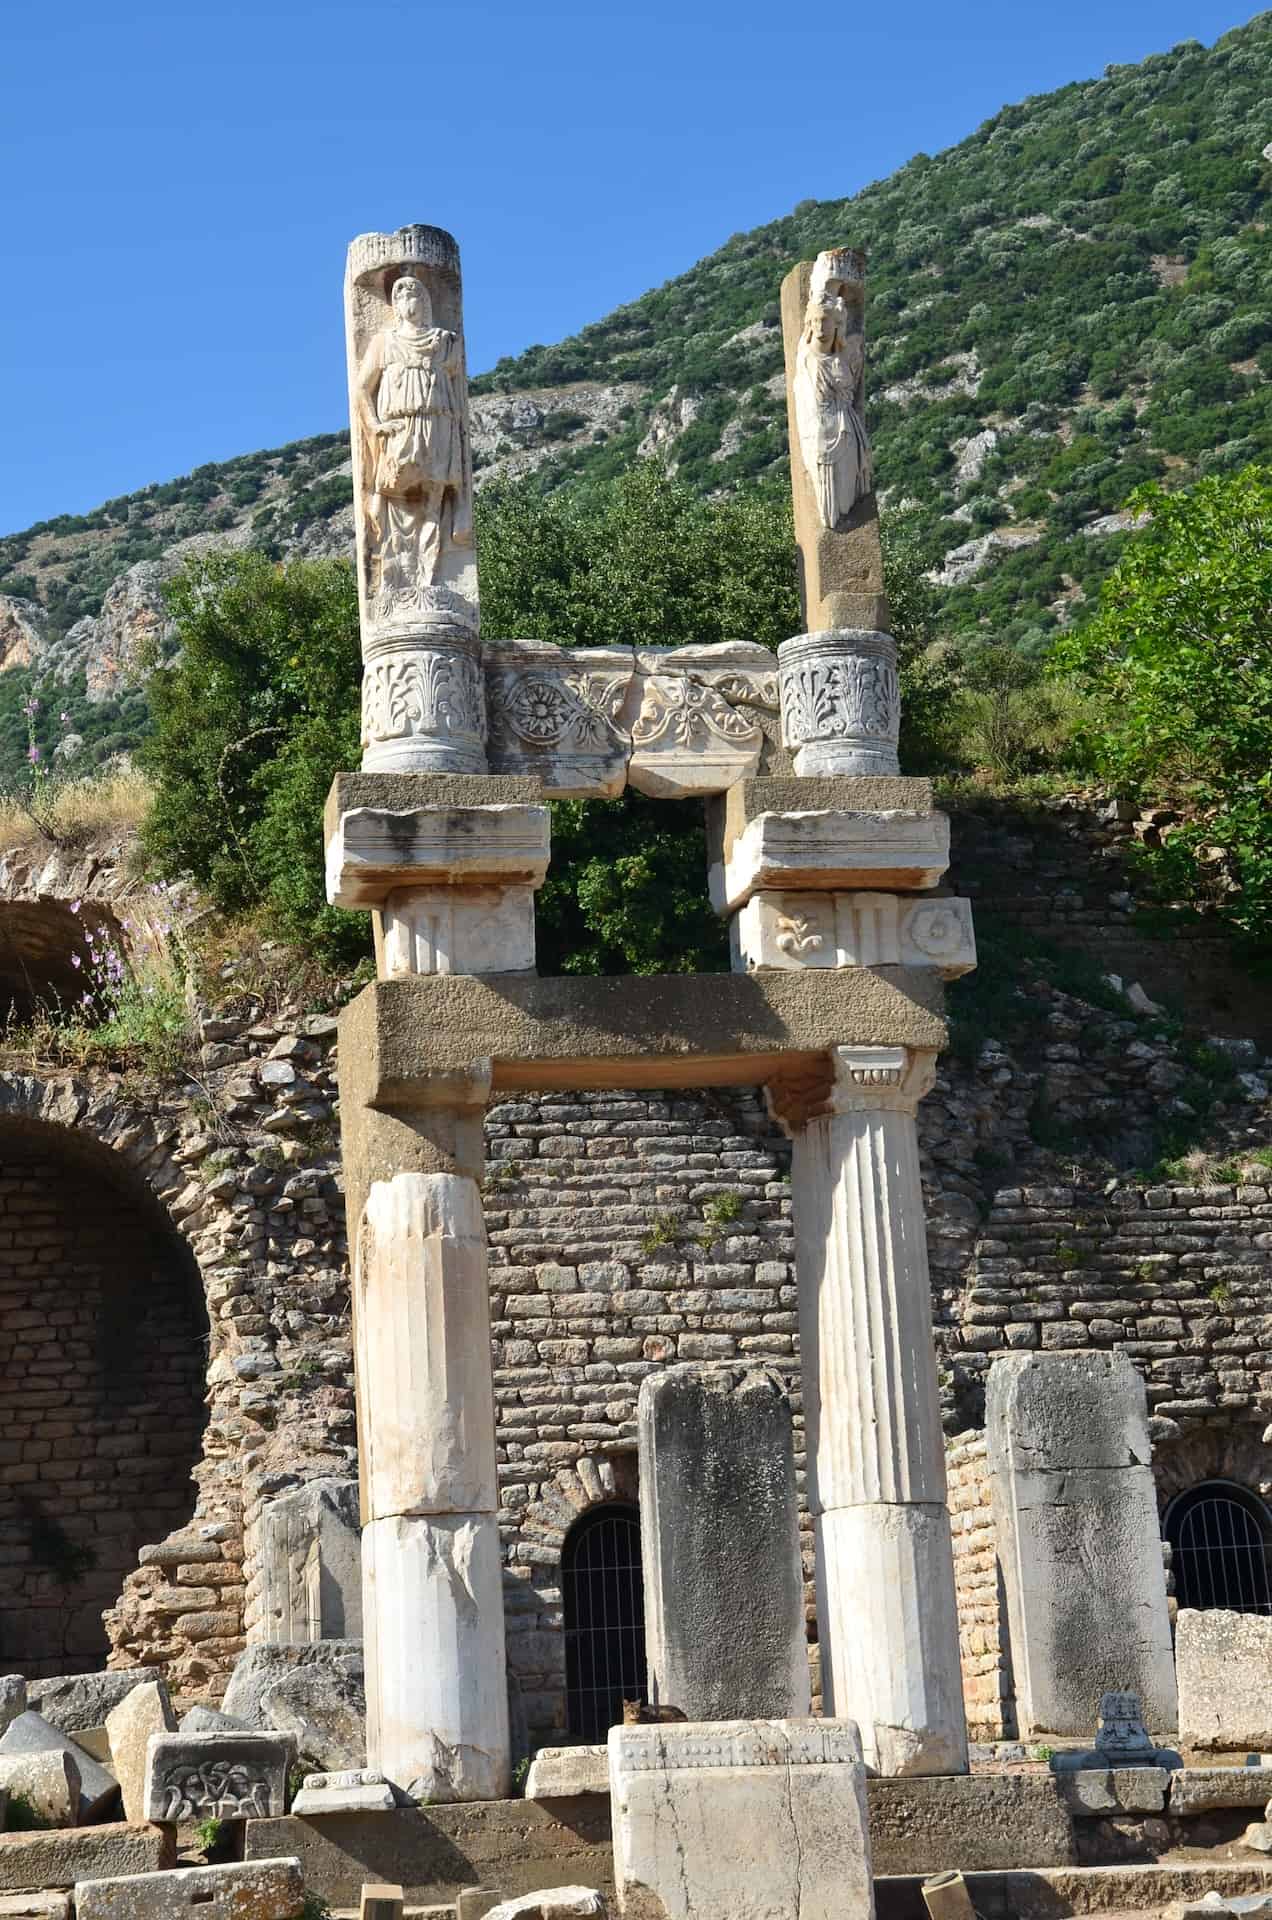 Reconstructed section of the façade of the Temple of Domitian at Ephesus